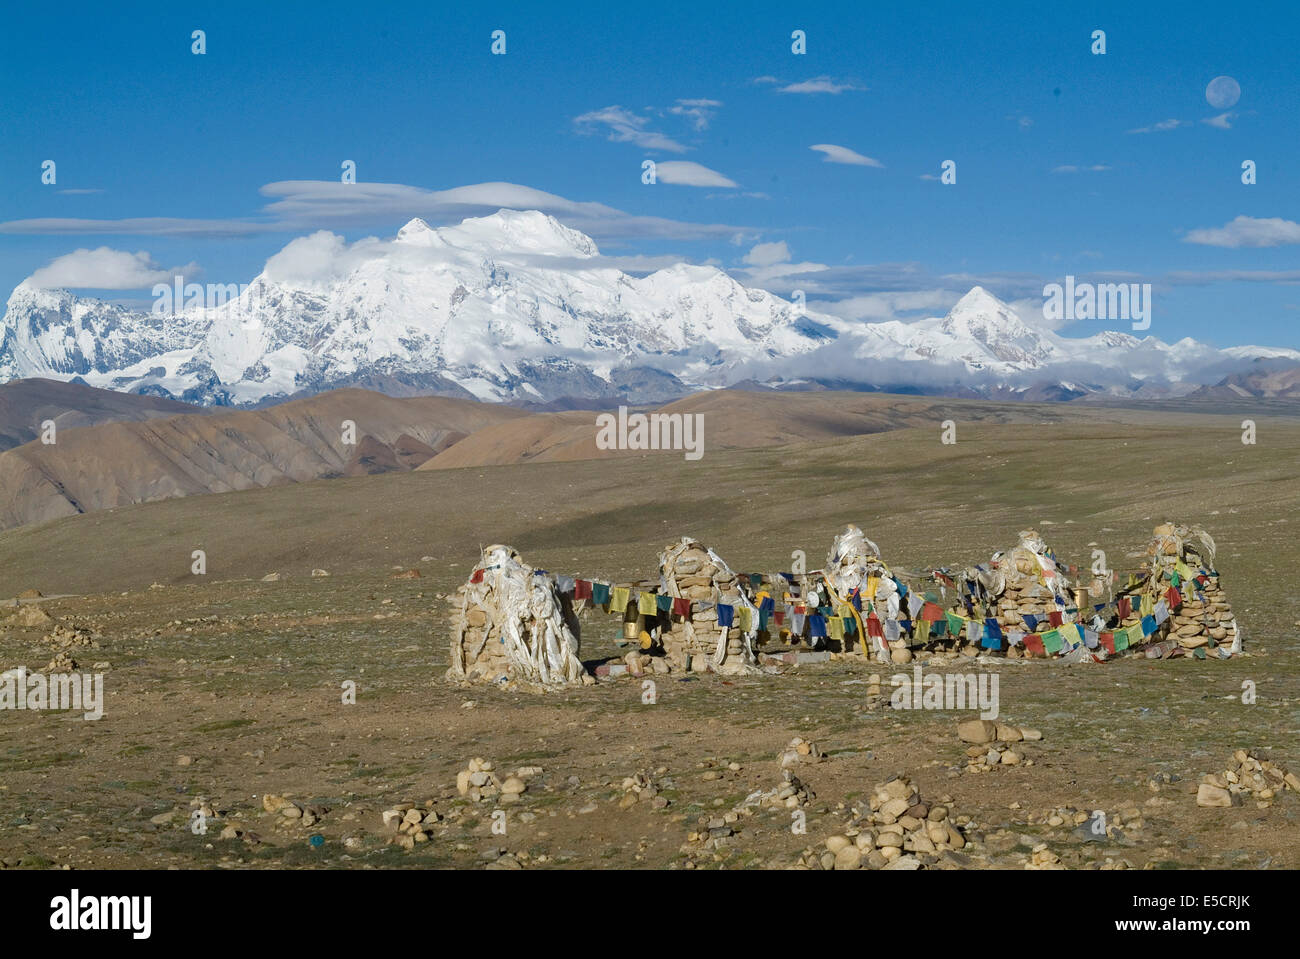 Himalaya range with prayer flags in the foreground, Tibet, China Stock Photo